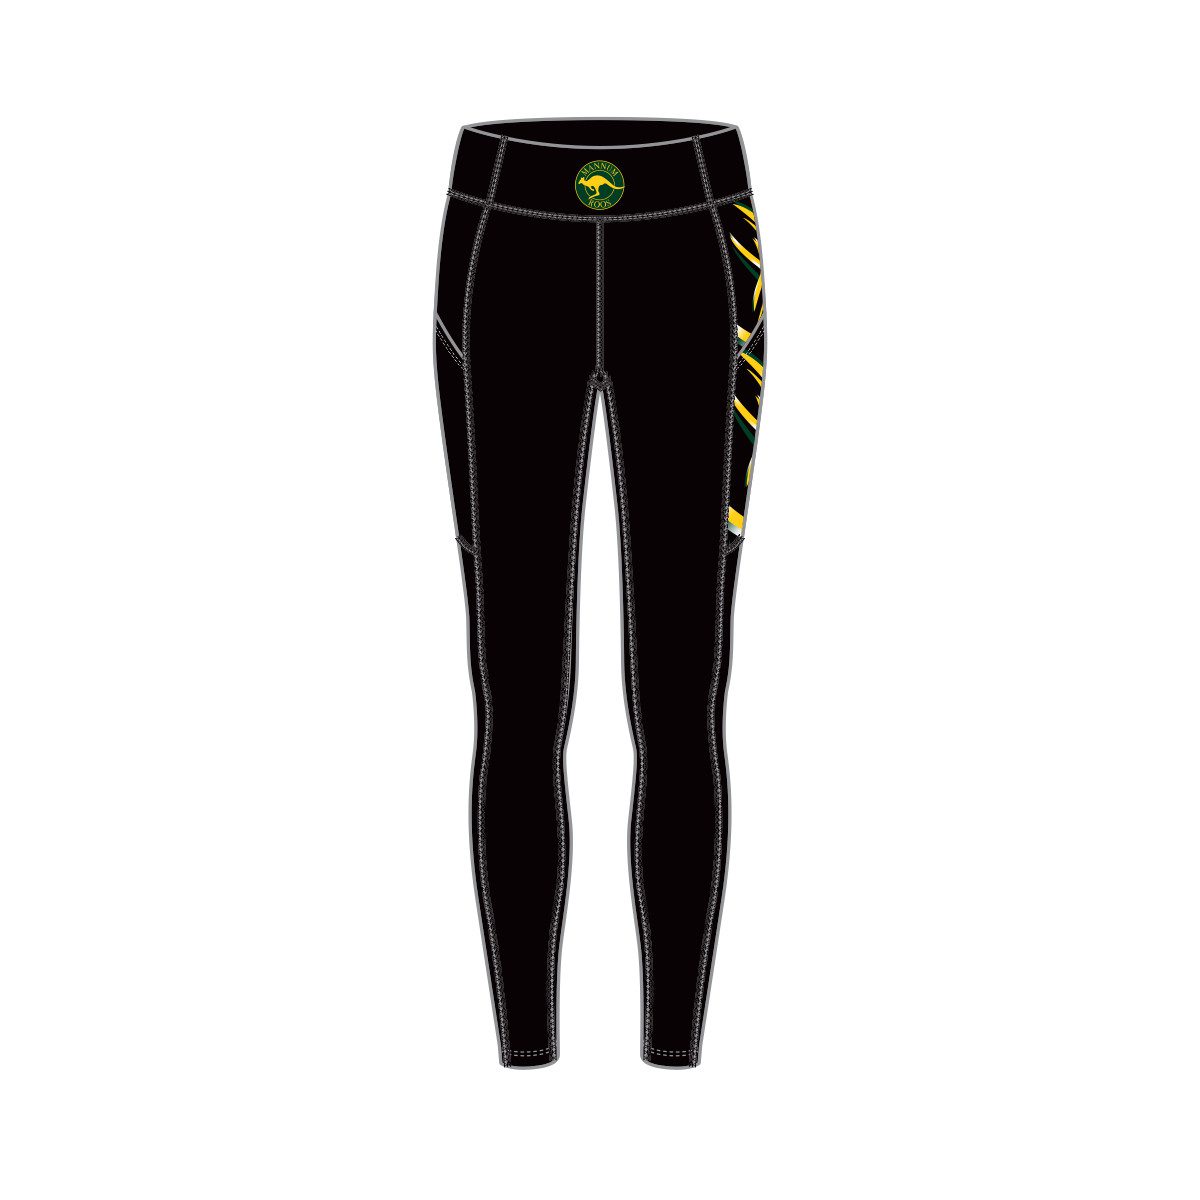 MANNUM ROOS FOOTBALL CLUB - COMPRESSION LONG TIGHTS - MEN'S